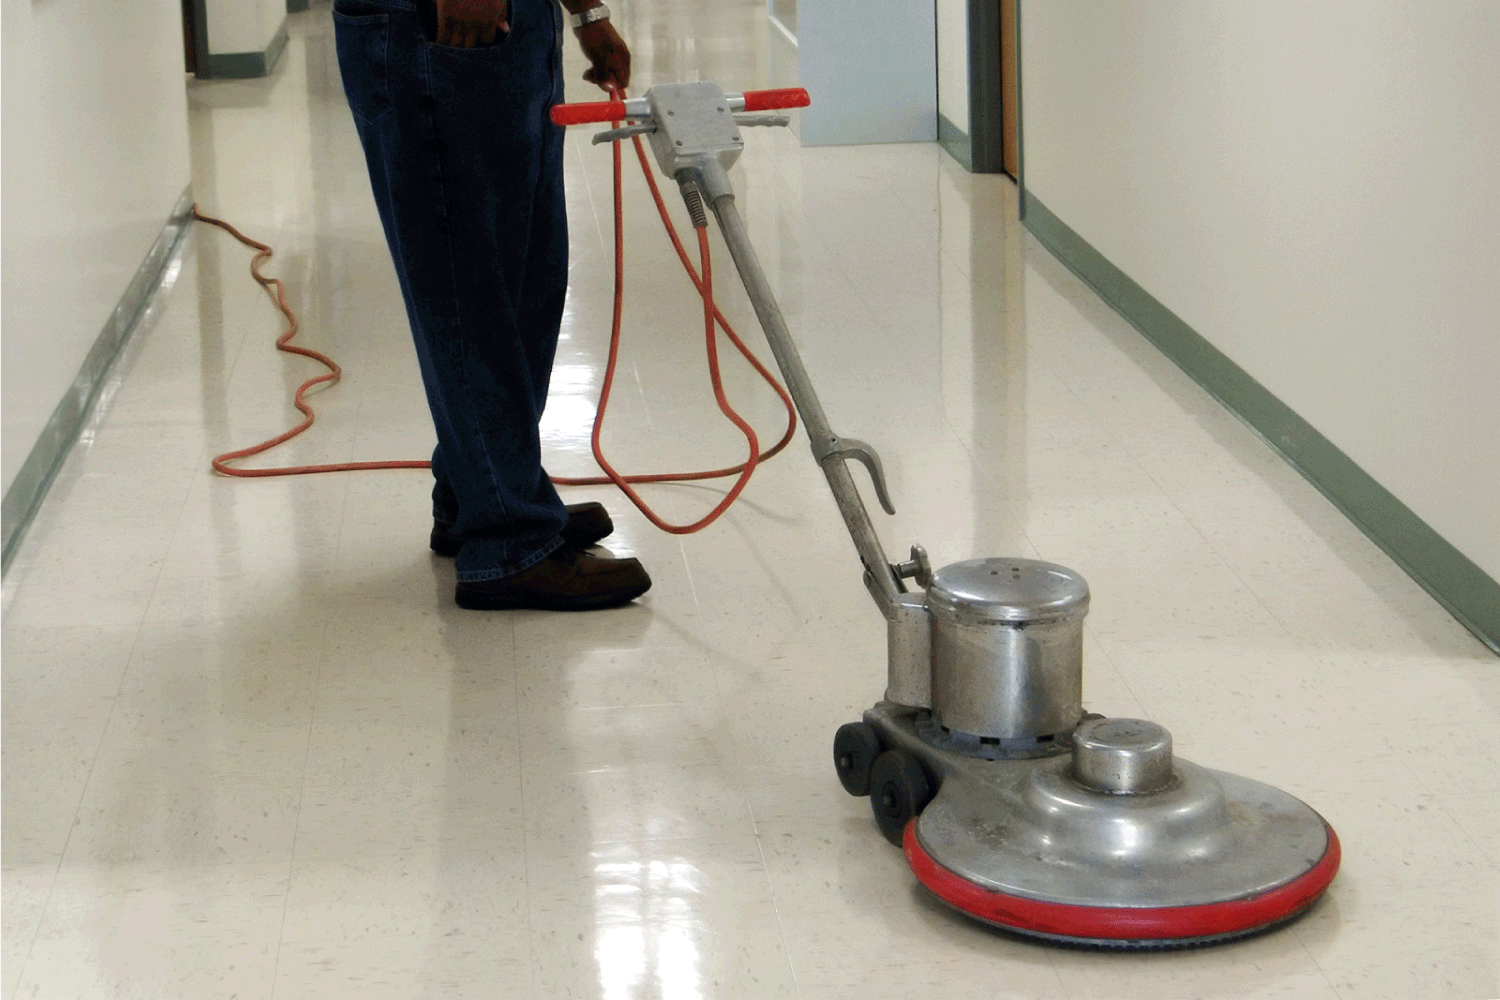 Commercial floor buffing machine in a hallway